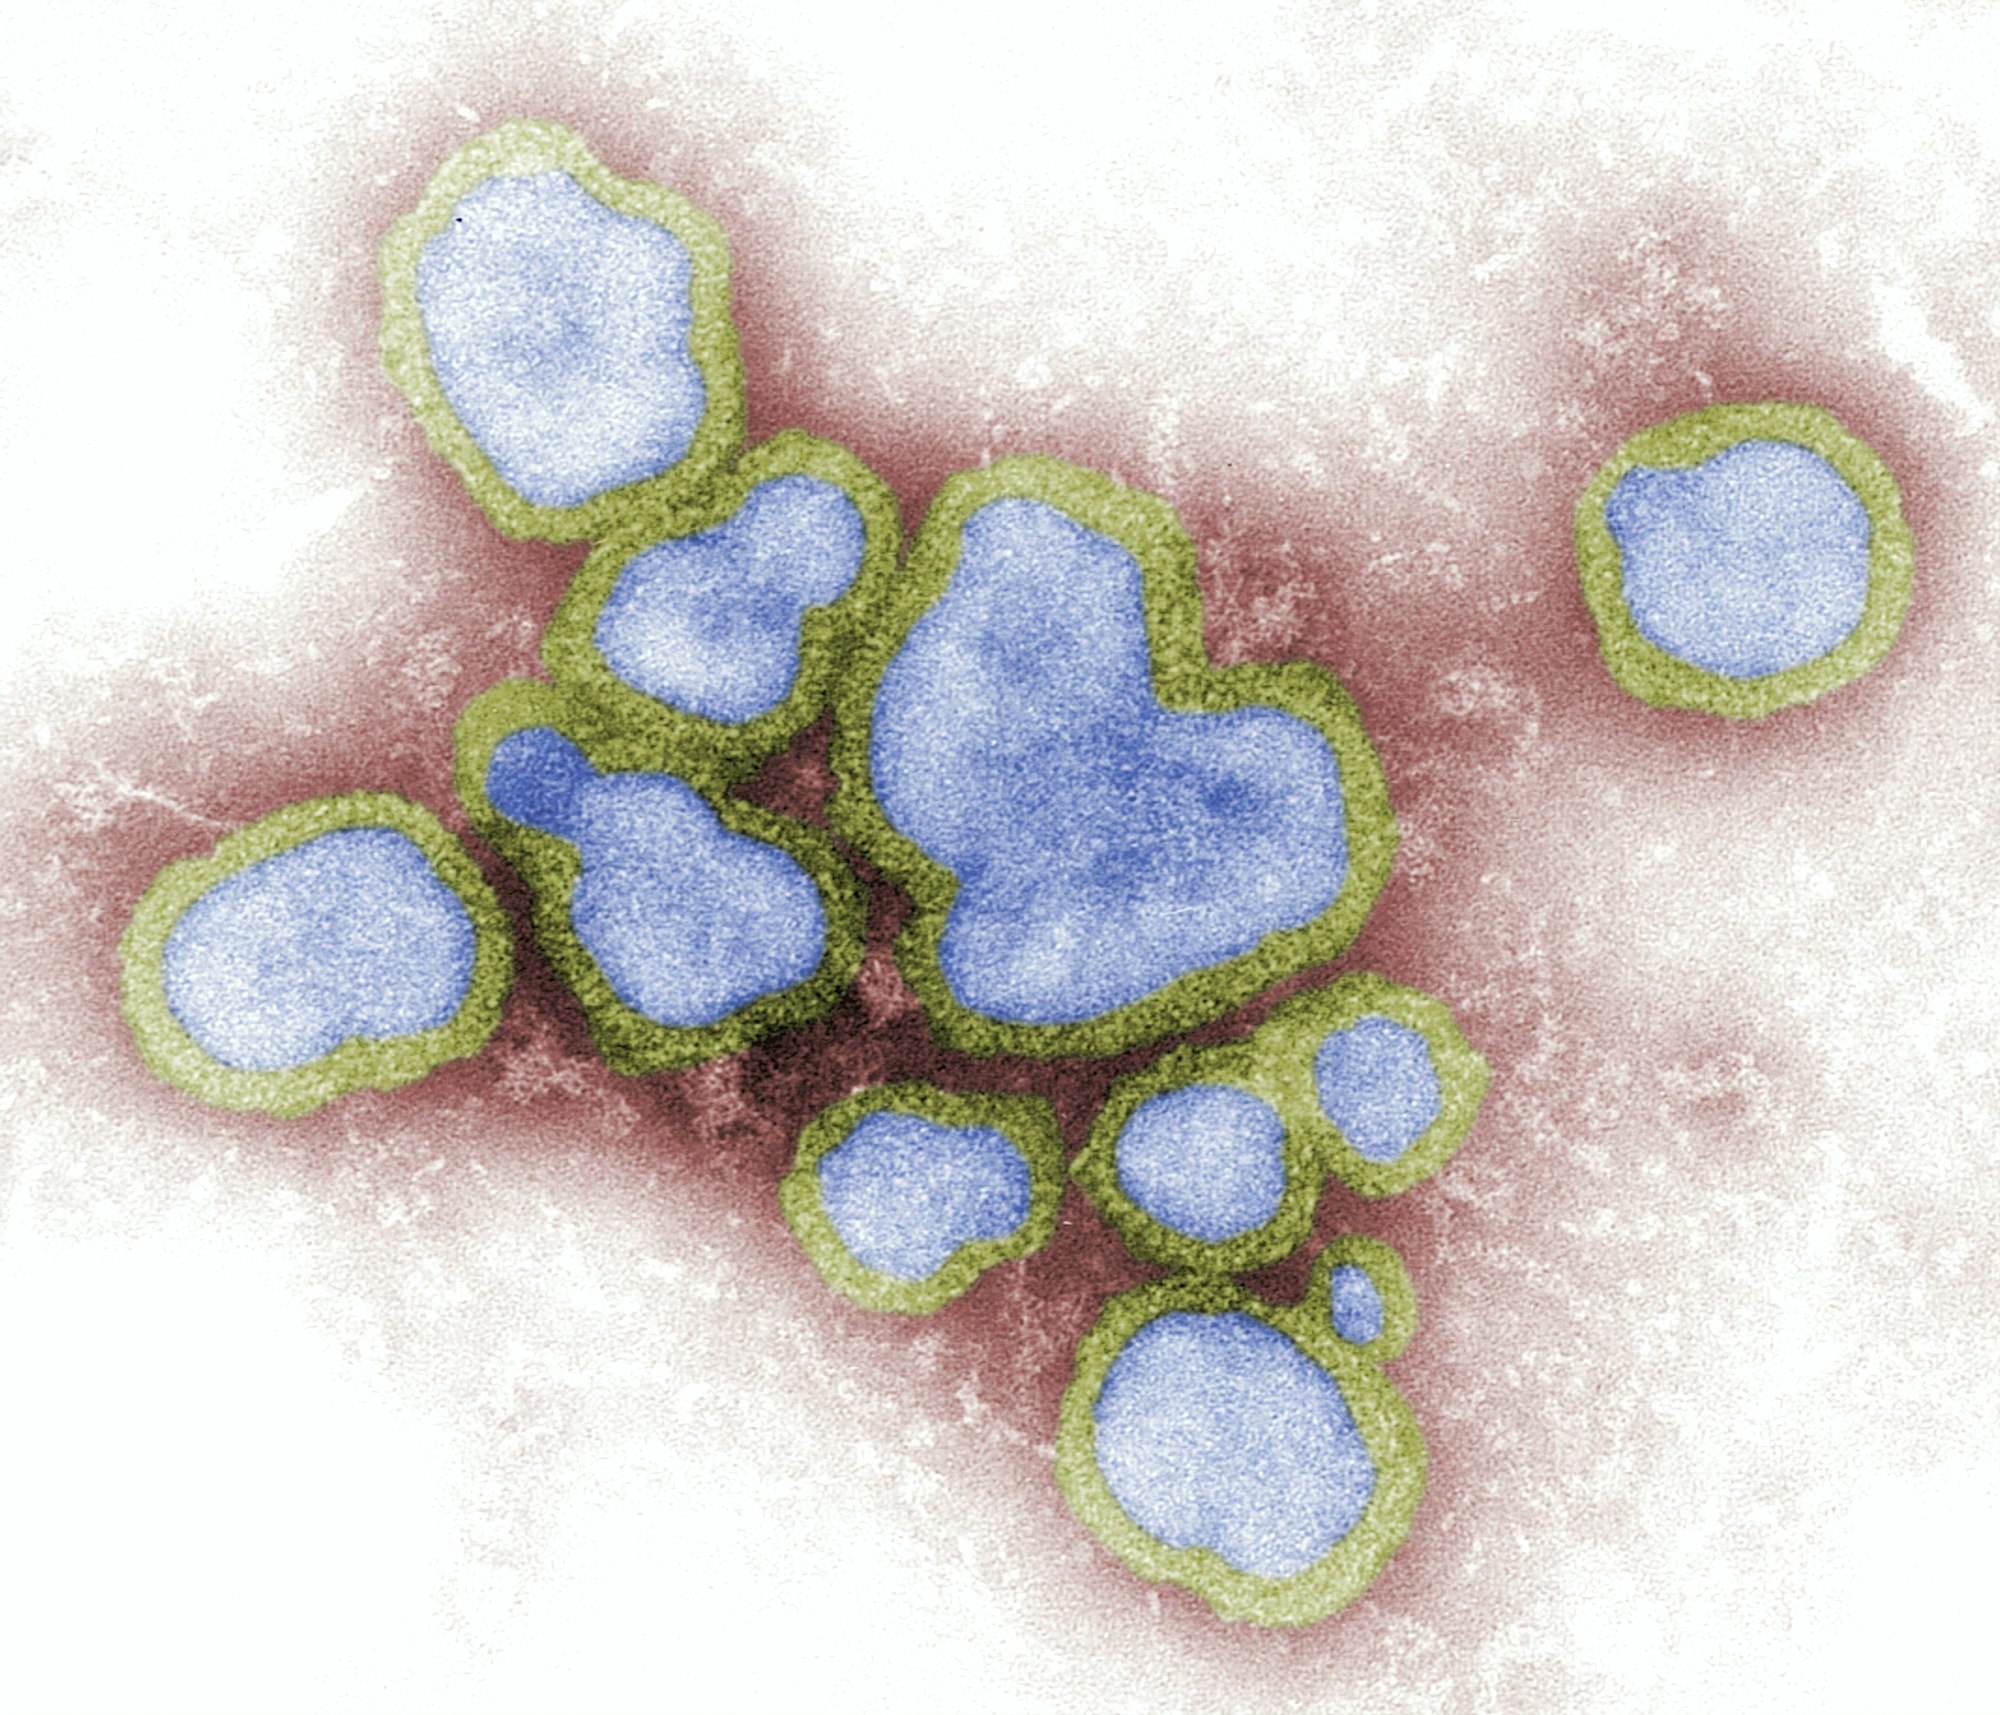 Overview of Avian Influenza in India